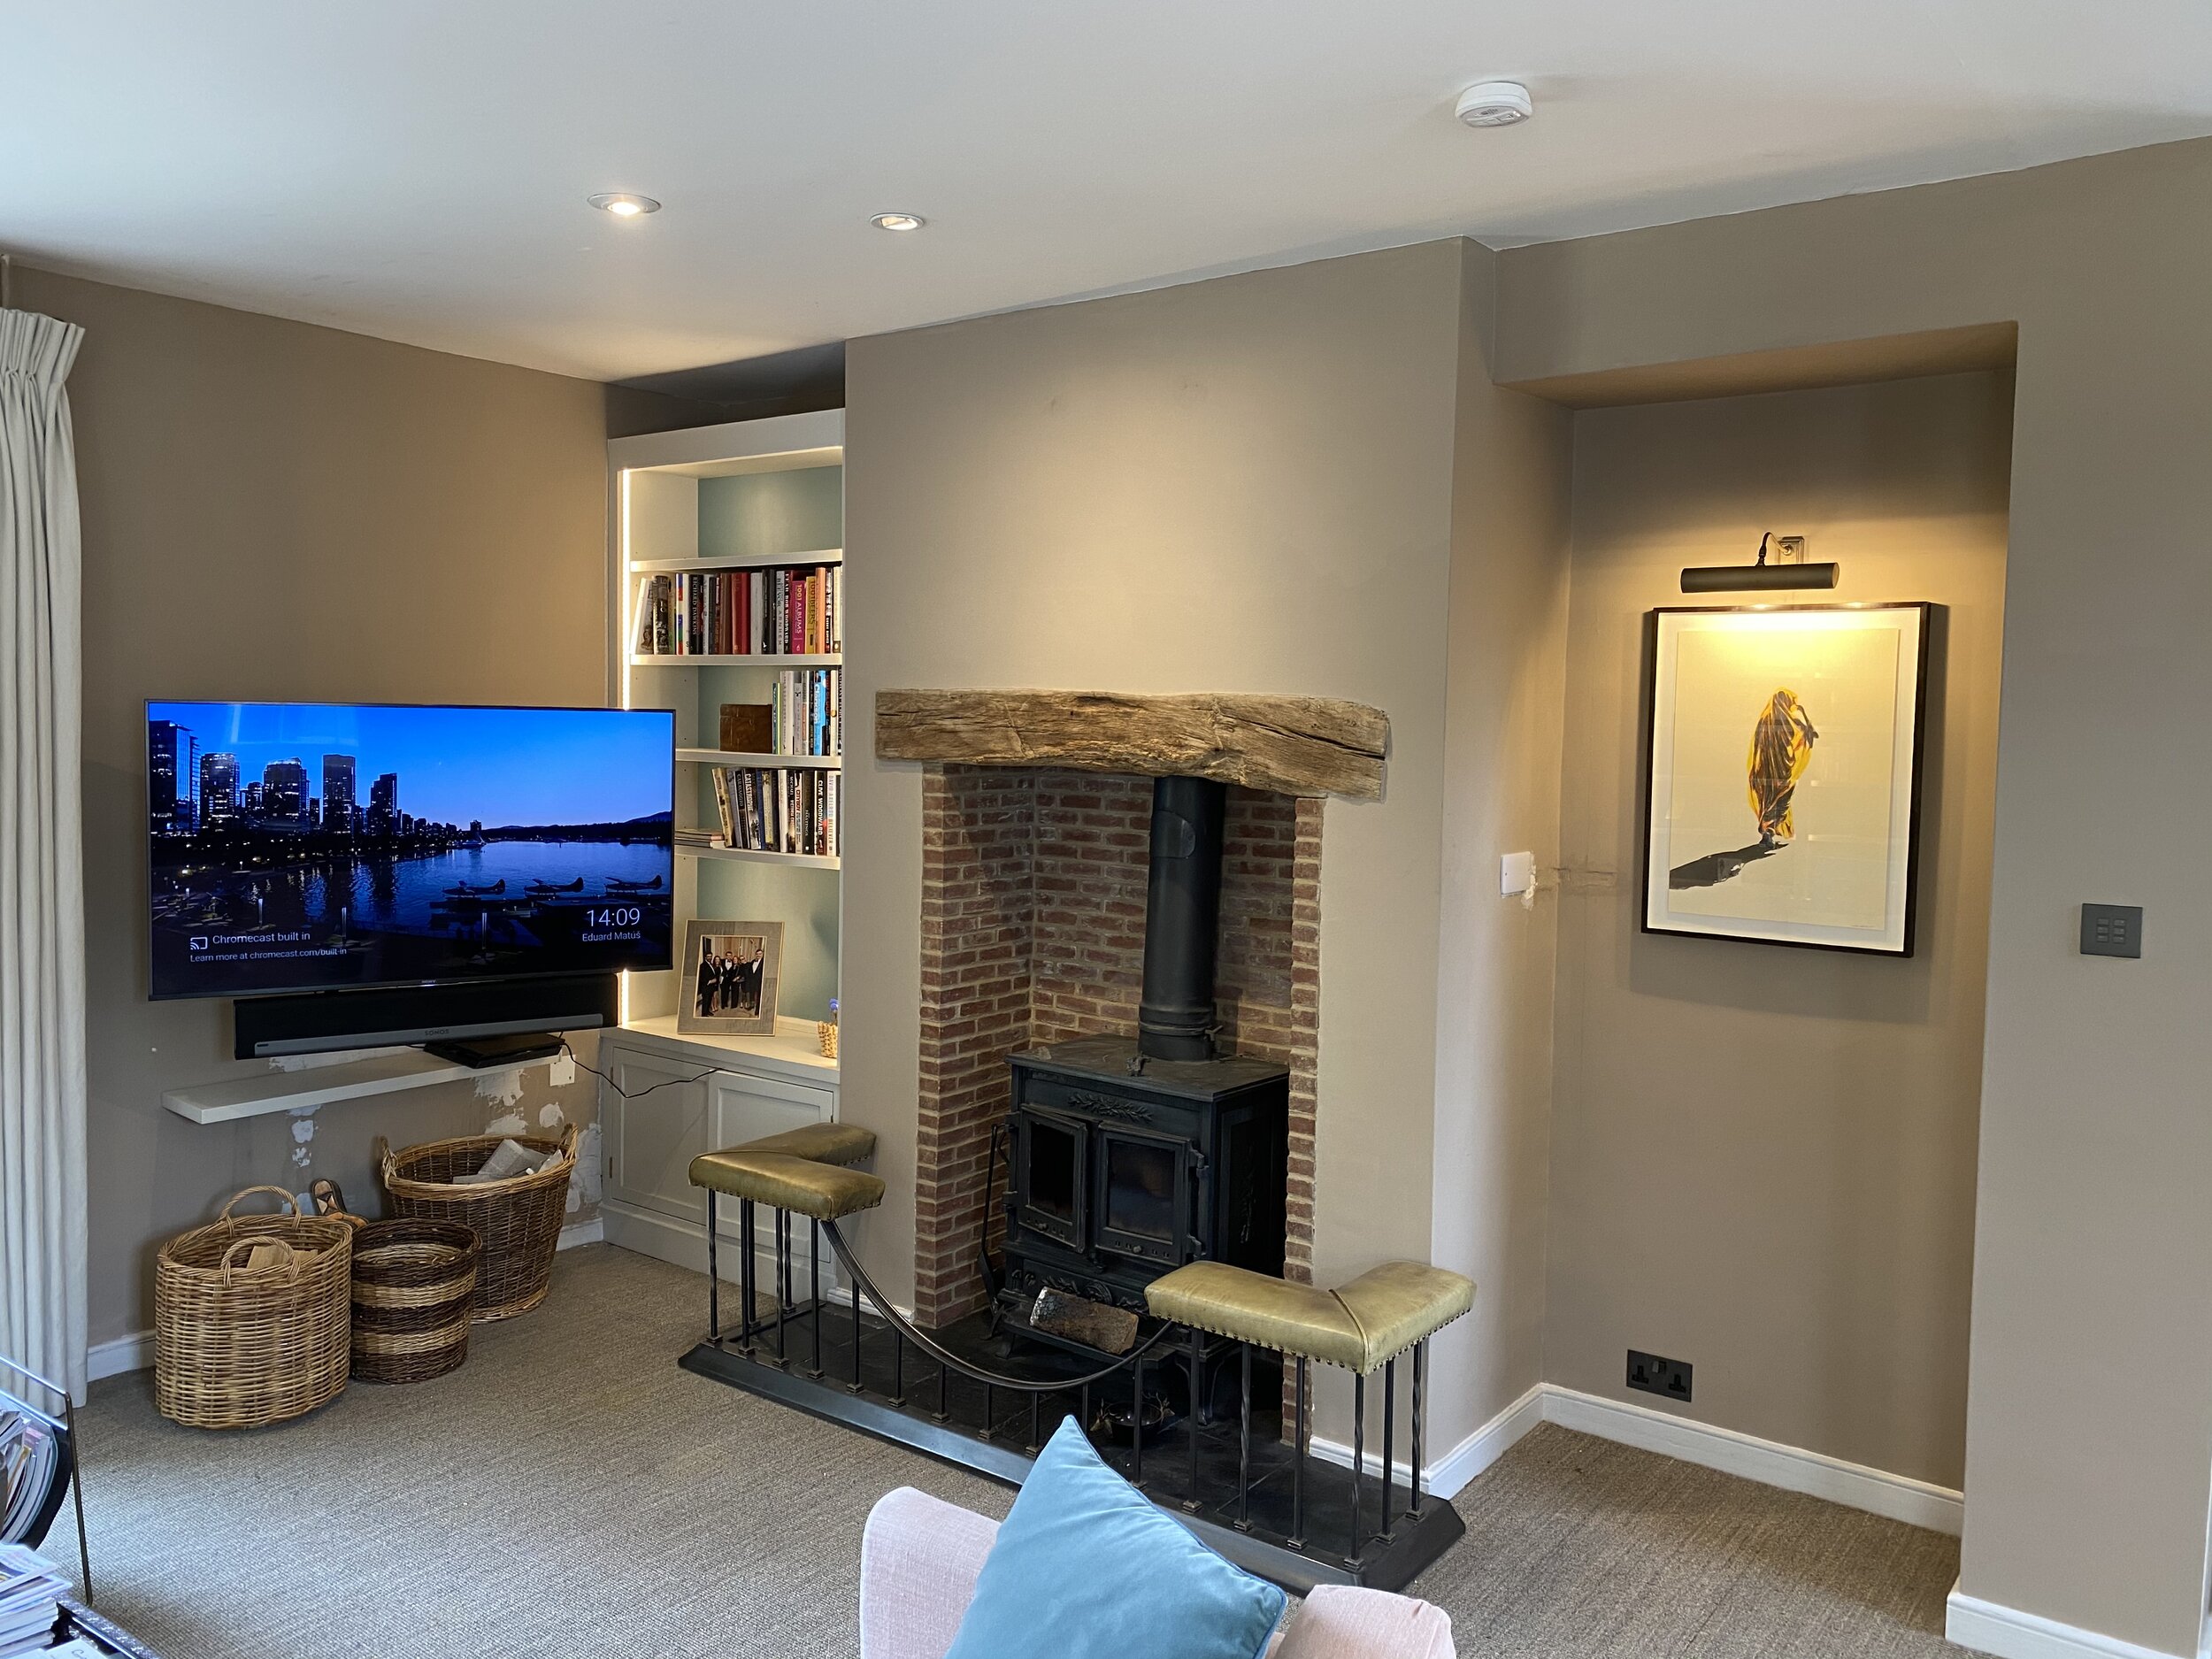 Interior of a living room with OLED television in the corner of the room and Rako light switch mounted to the wall